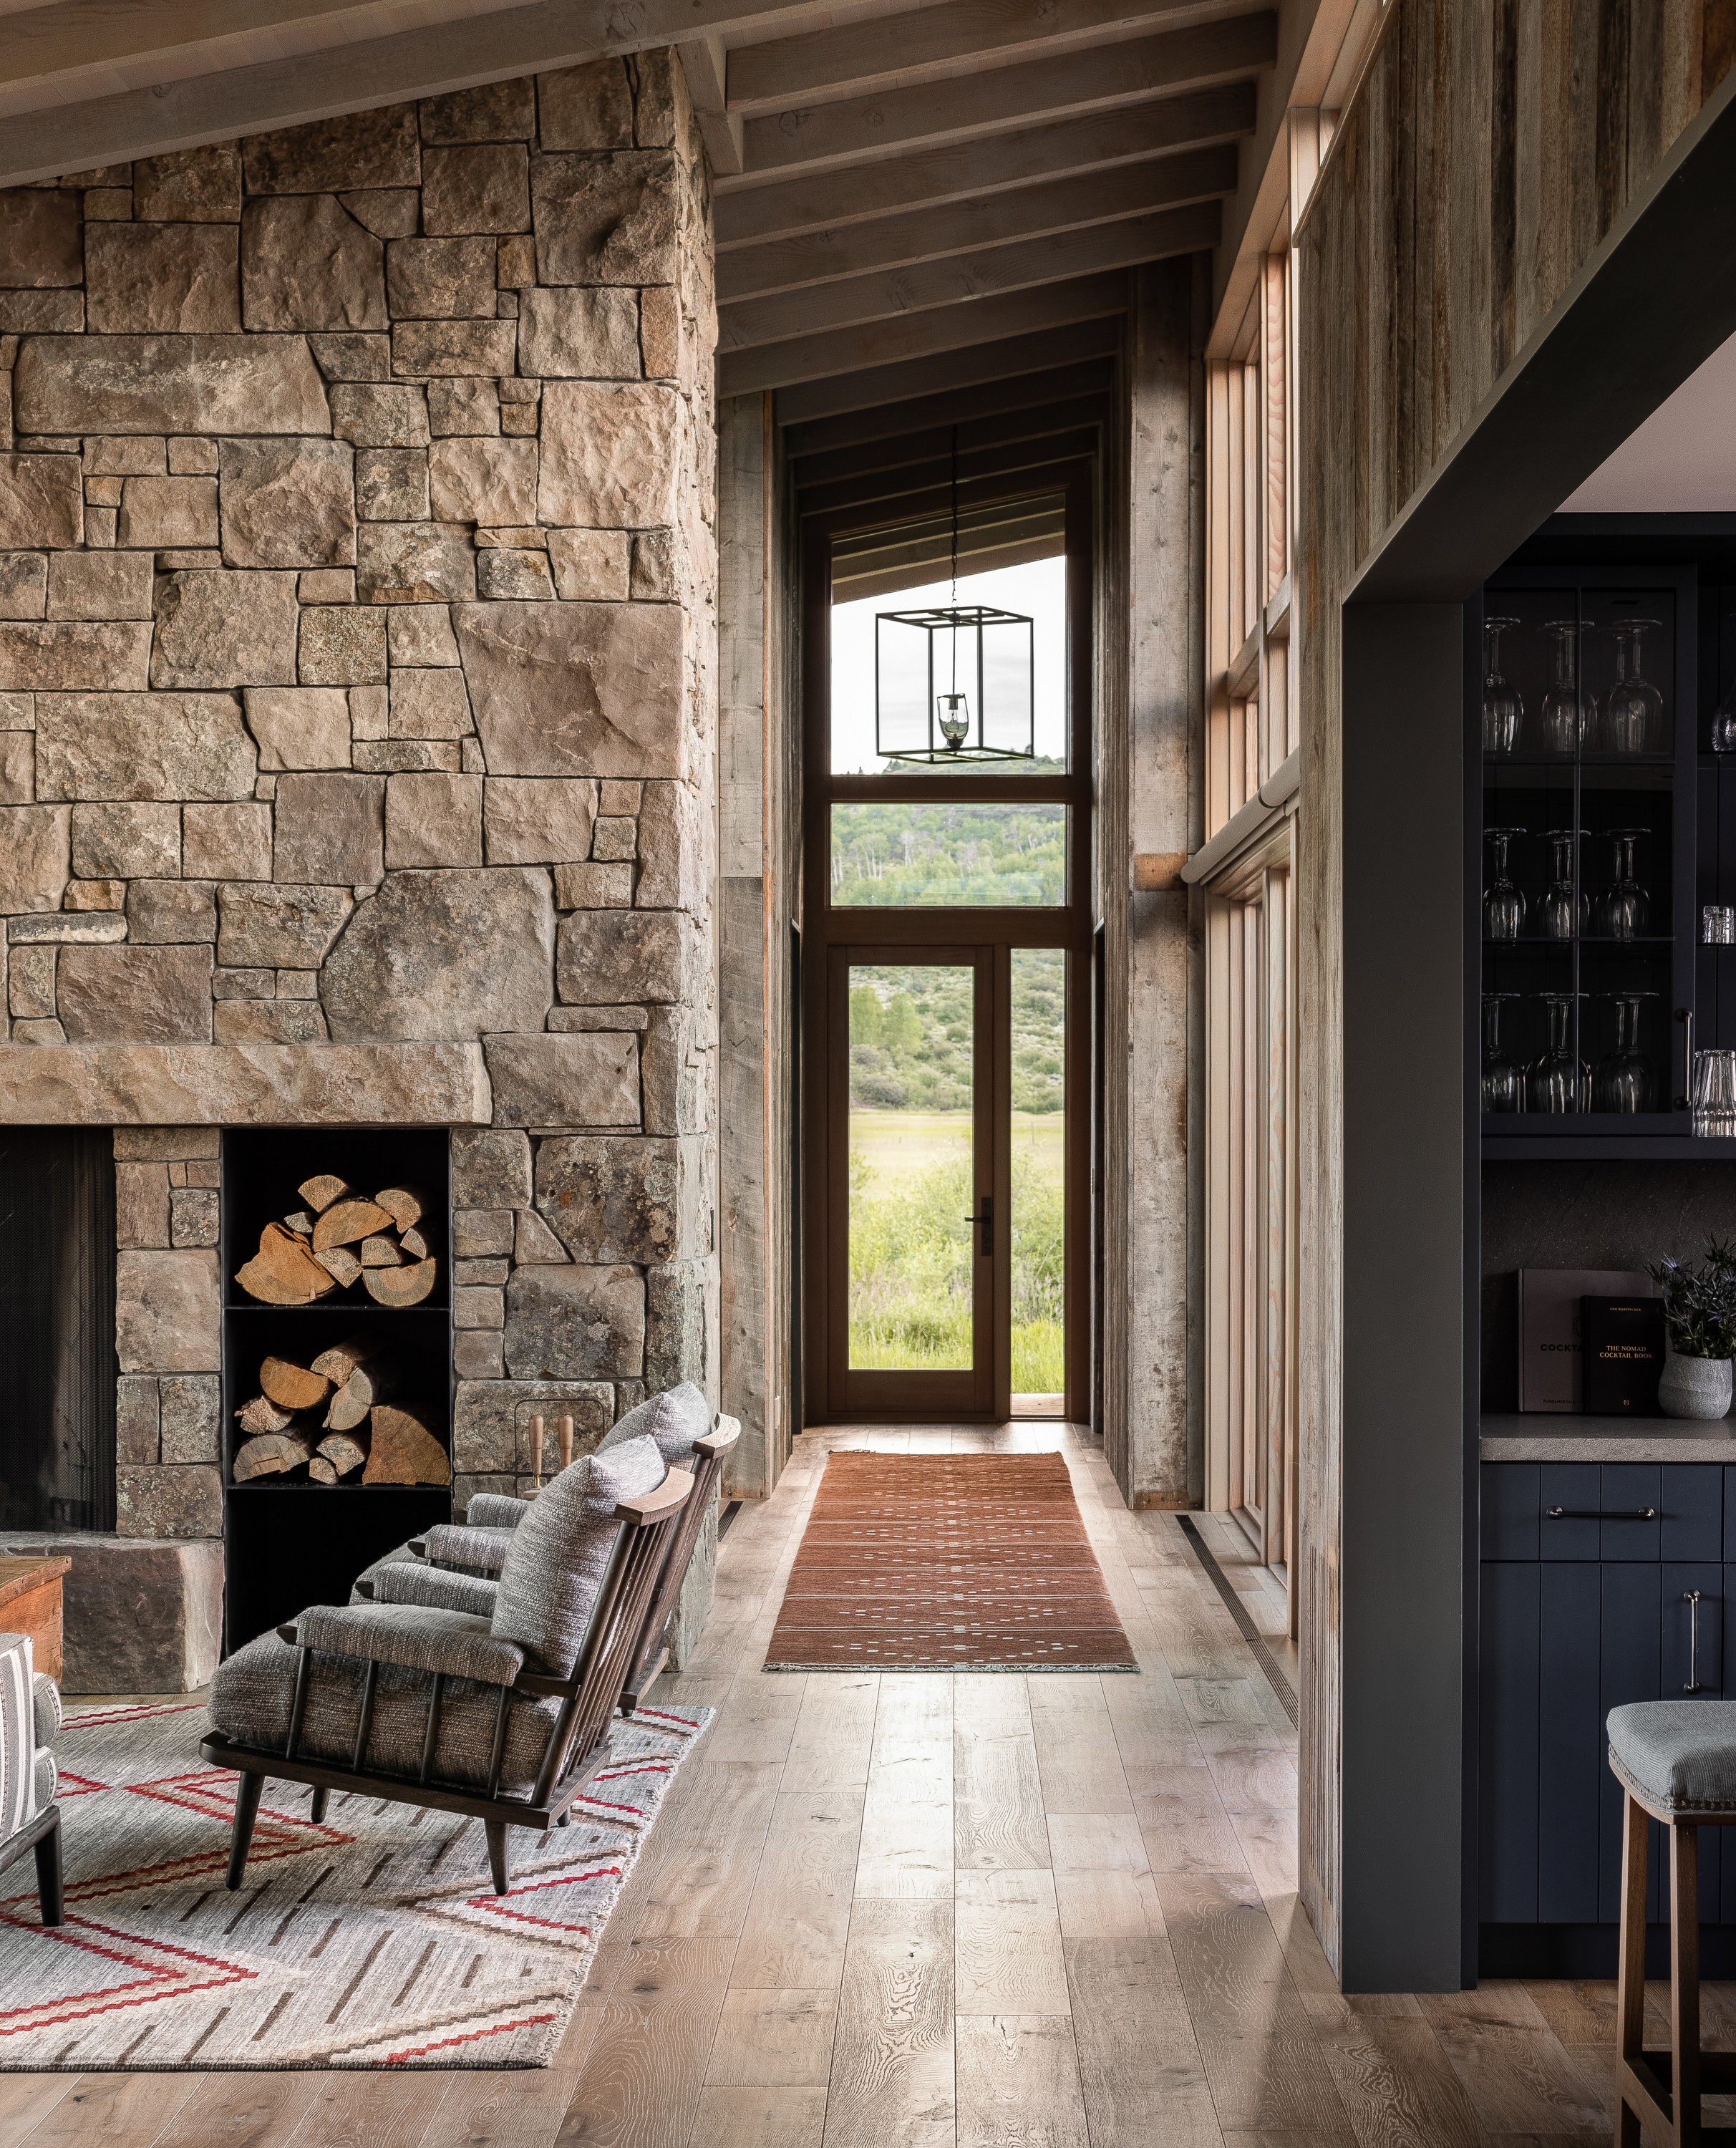 This shot looks down the hallway of the main house. On one side, we catch a glimpse of the massive stone fireplace, and on the other, we see a hint of the blue kitchen cabinetry.